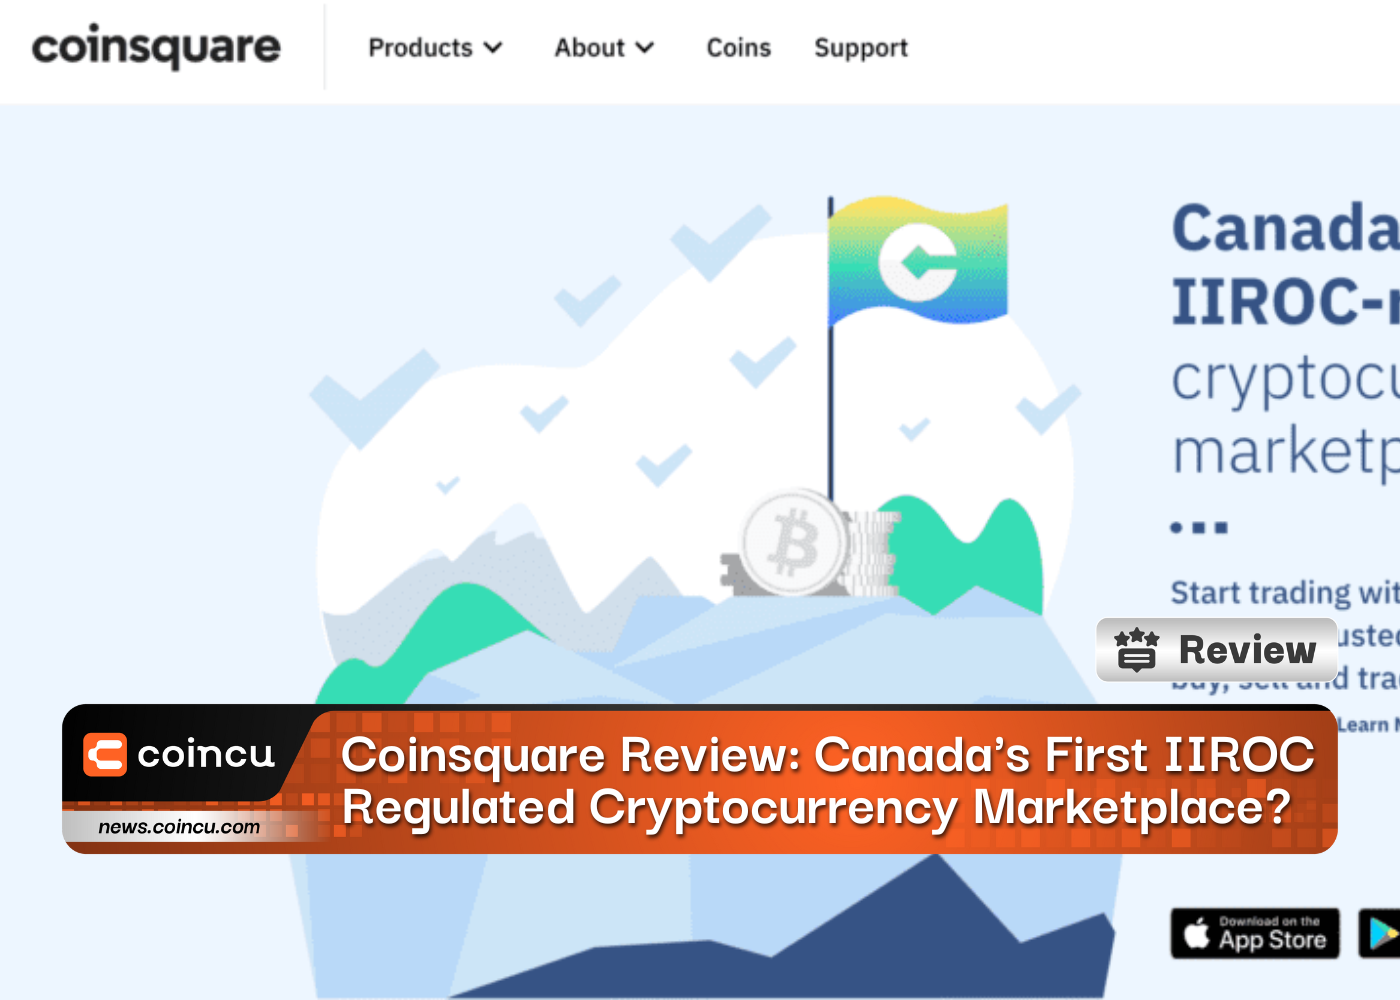 Coinsquare Review Canadas First IIROC